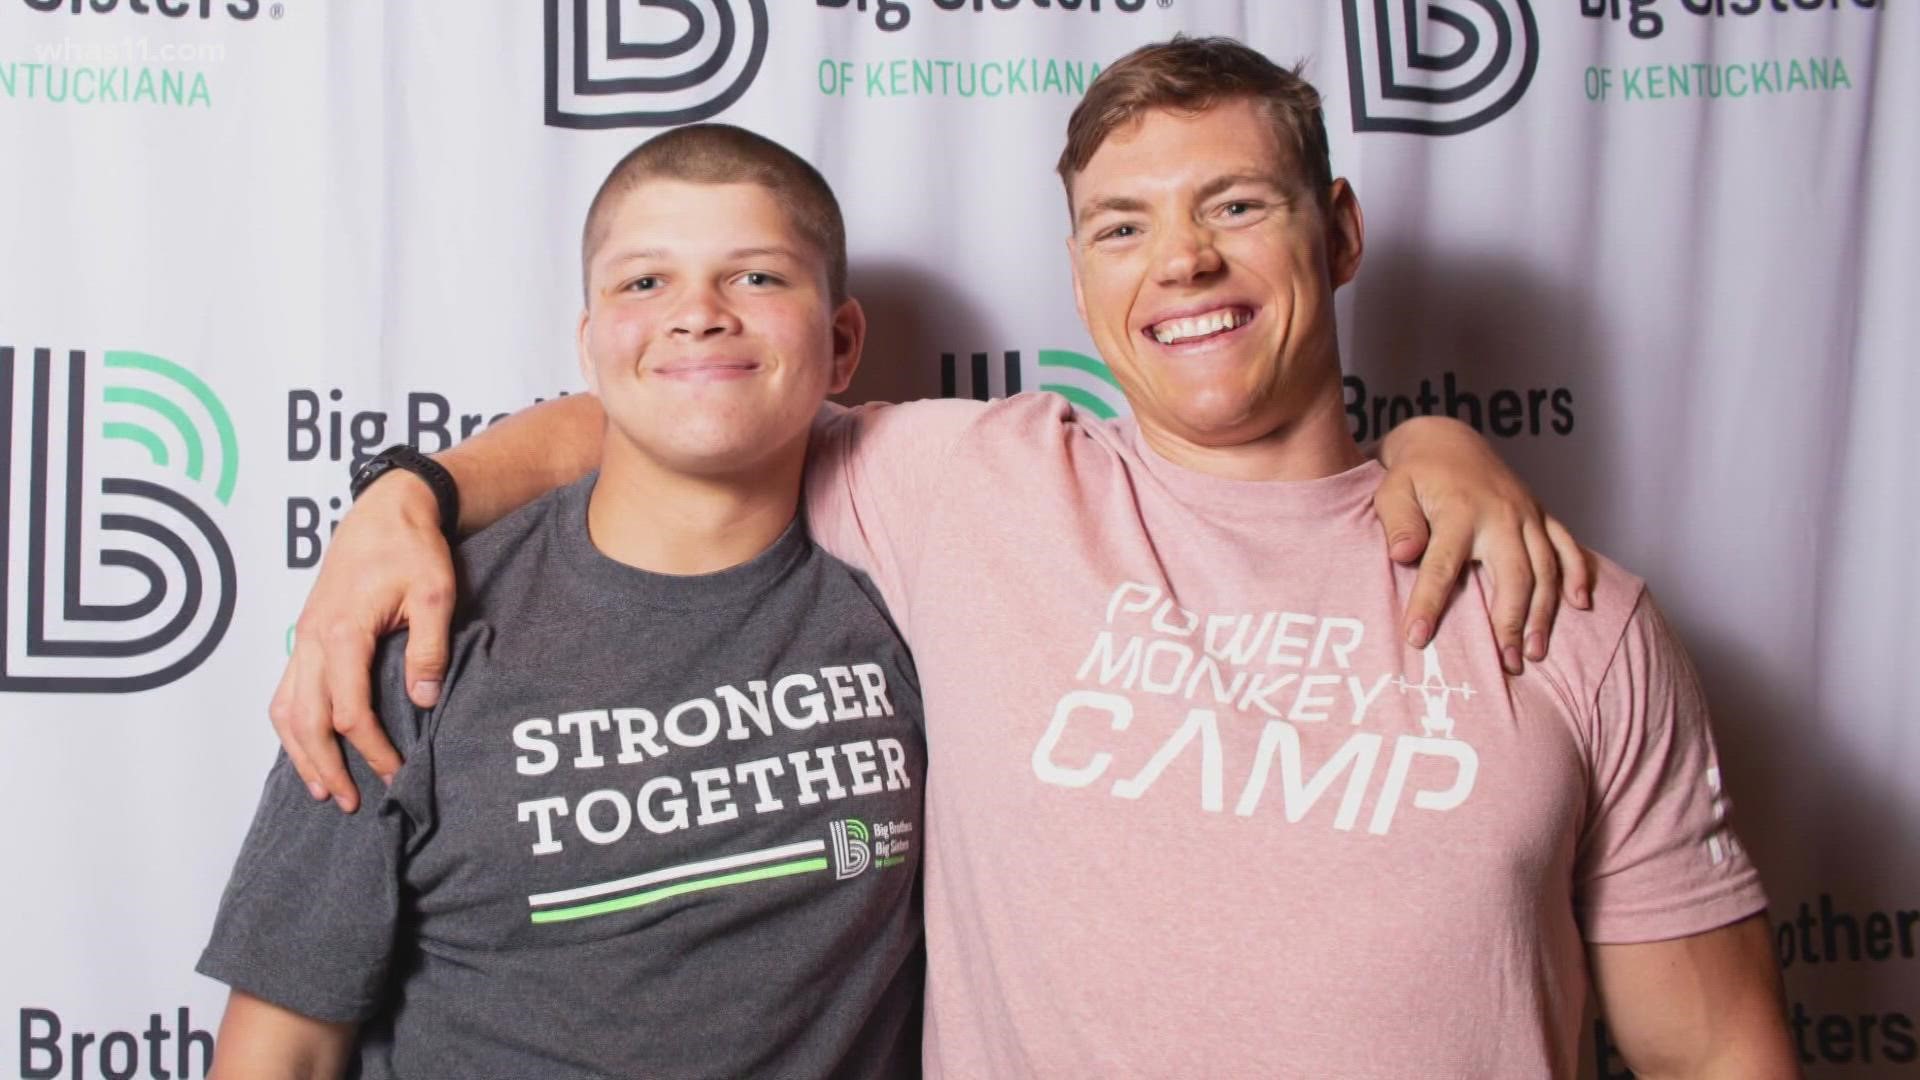 Big Brothers Big Sisters of Kentuckiana is an organization dedicated to connecting young people to positive role models.